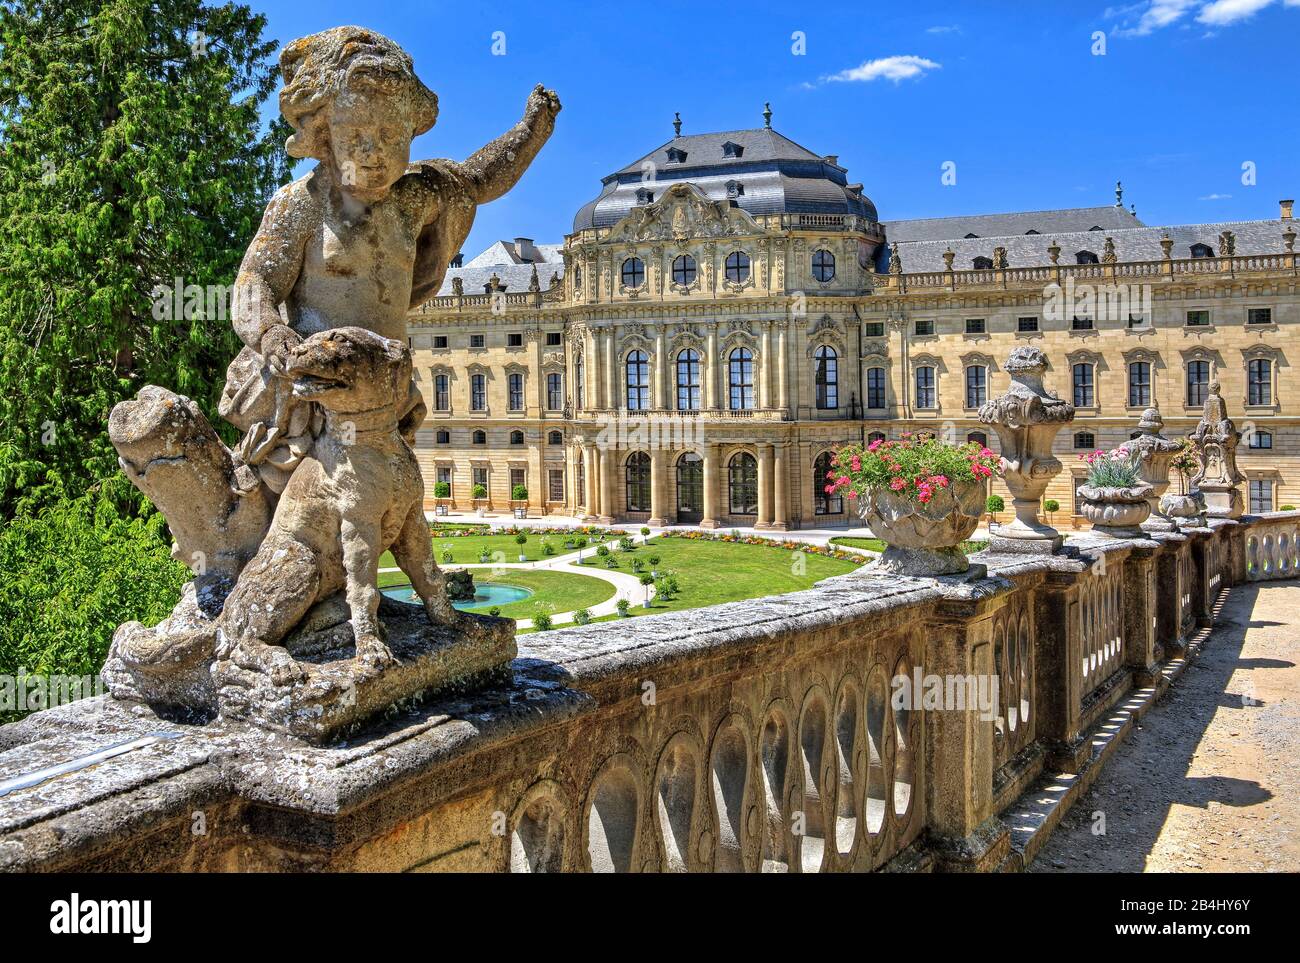 East side of the Residenz am Hofgarten with sculpture, Würzburg, Maintal, Lower Franconia, Franconia, Bavaria, Germany Stock Photo